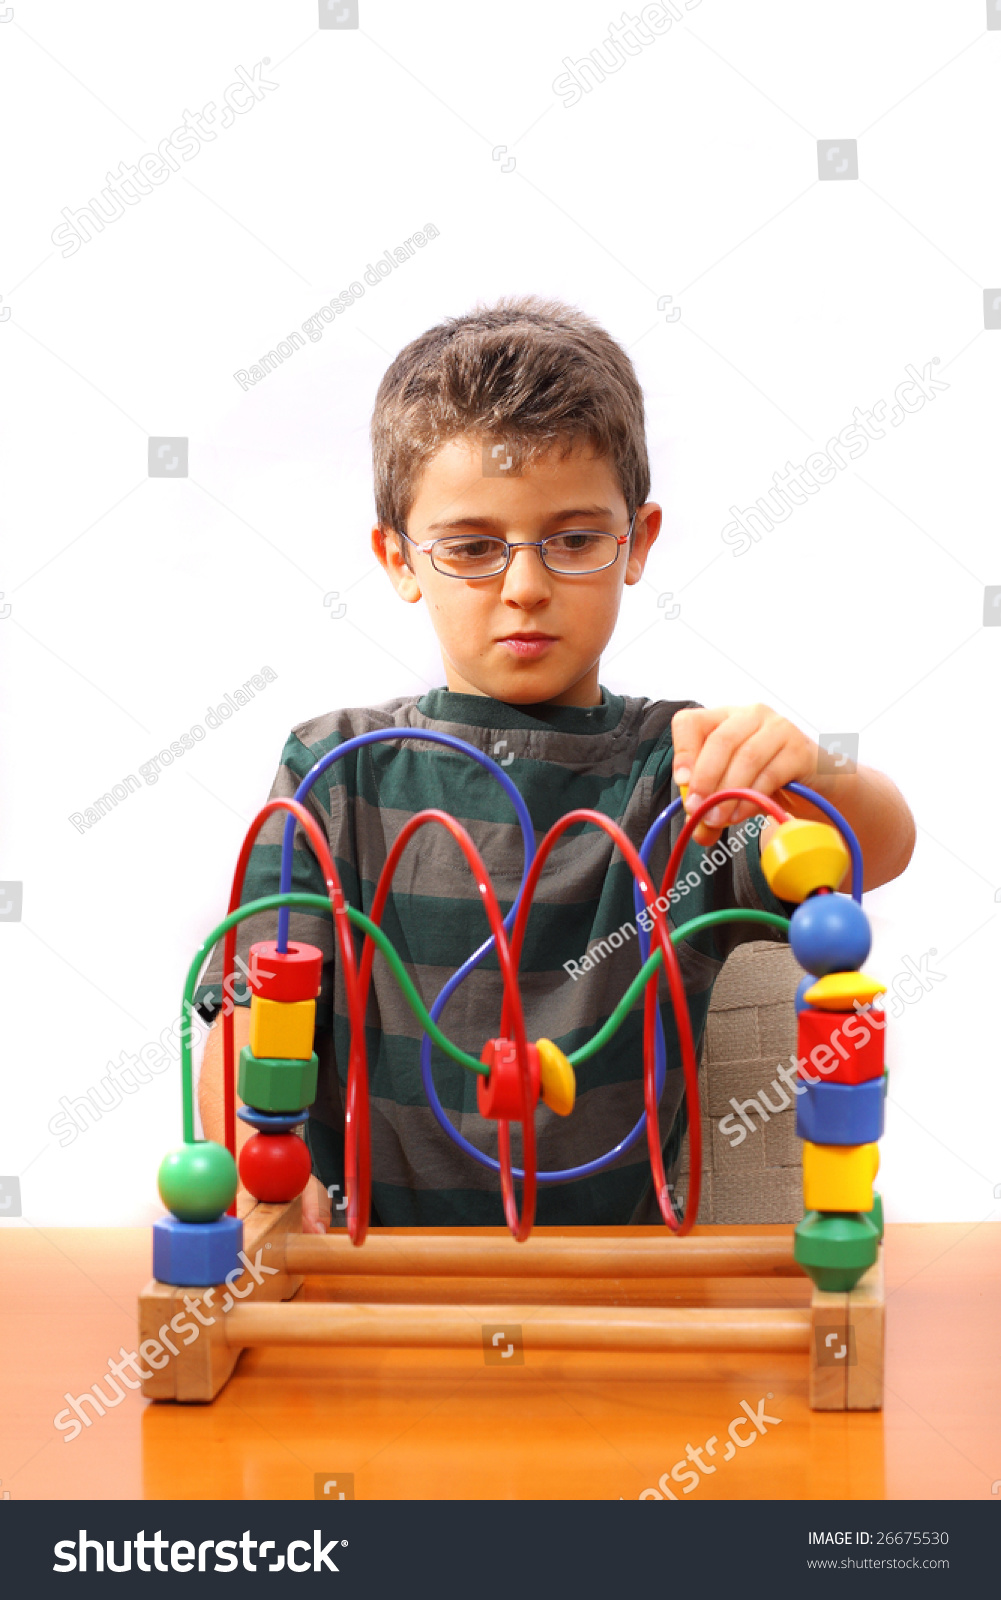 Little boy playing with colorful blocks #26675530